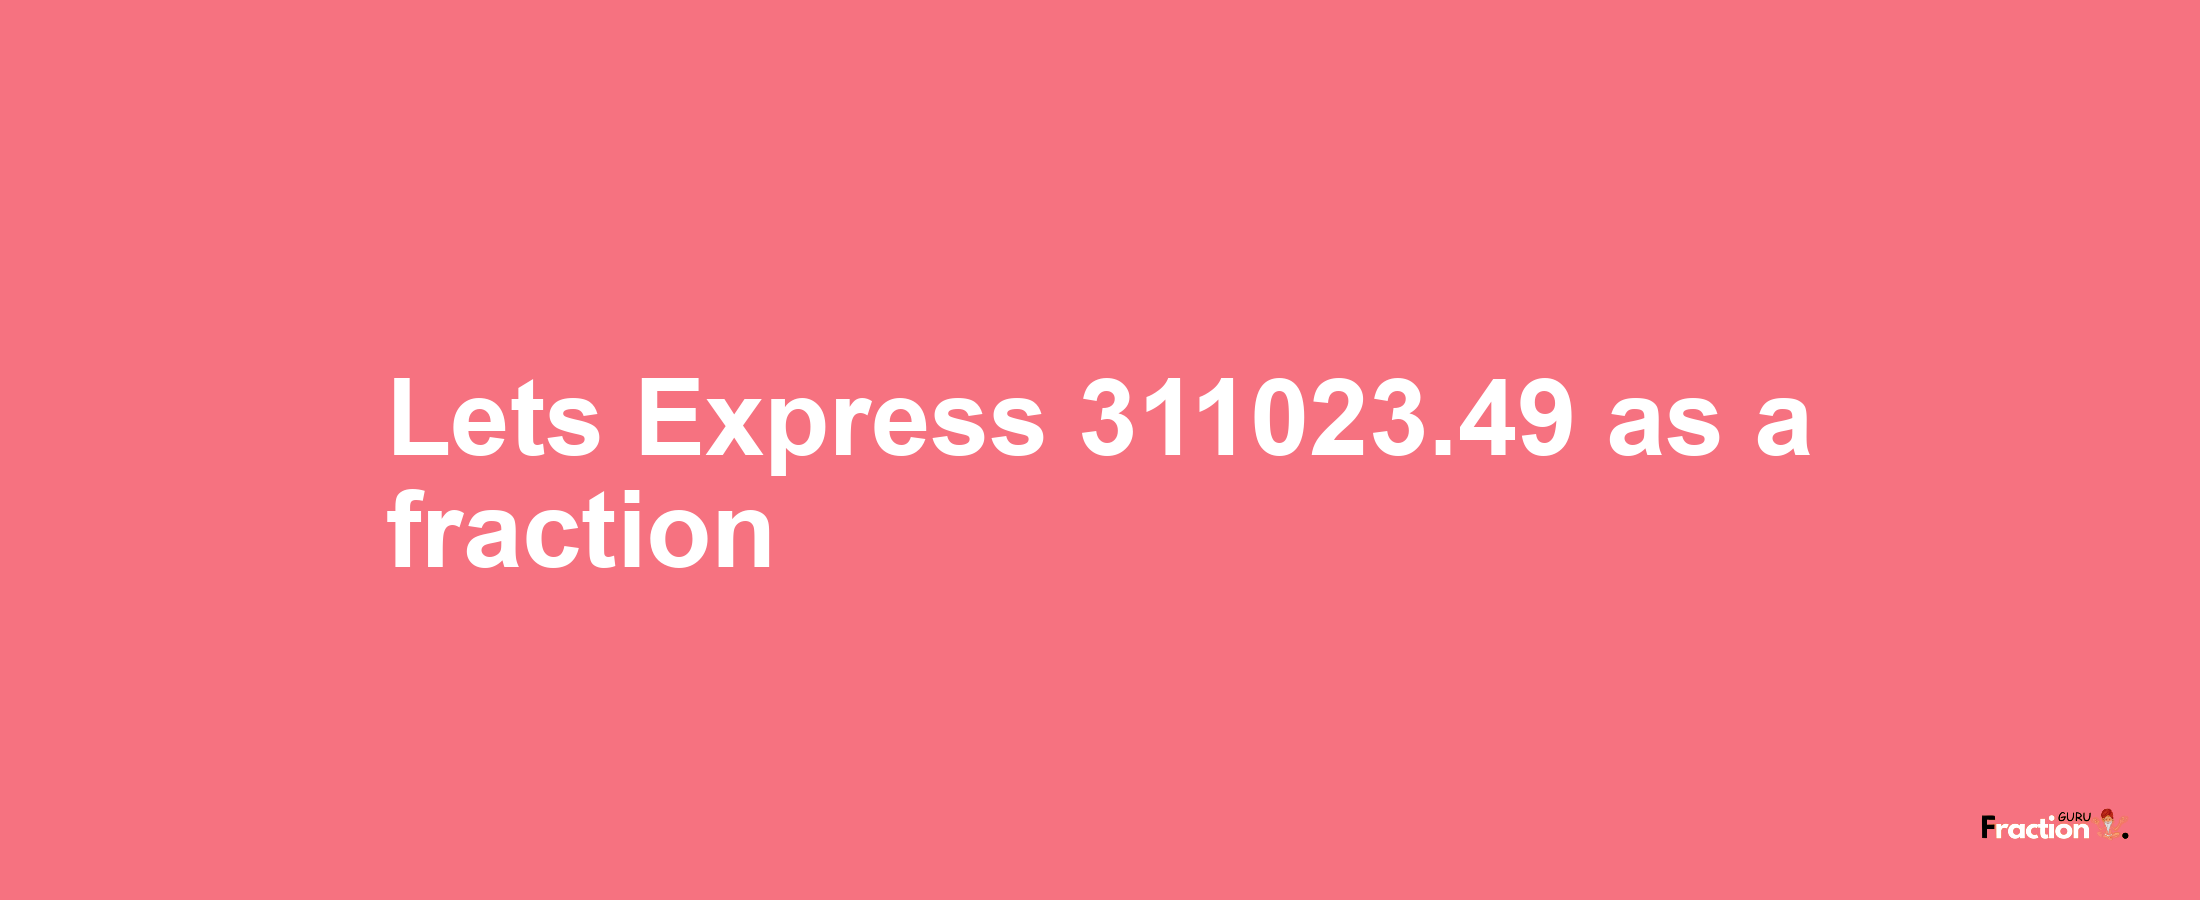 Lets Express 311023.49 as afraction